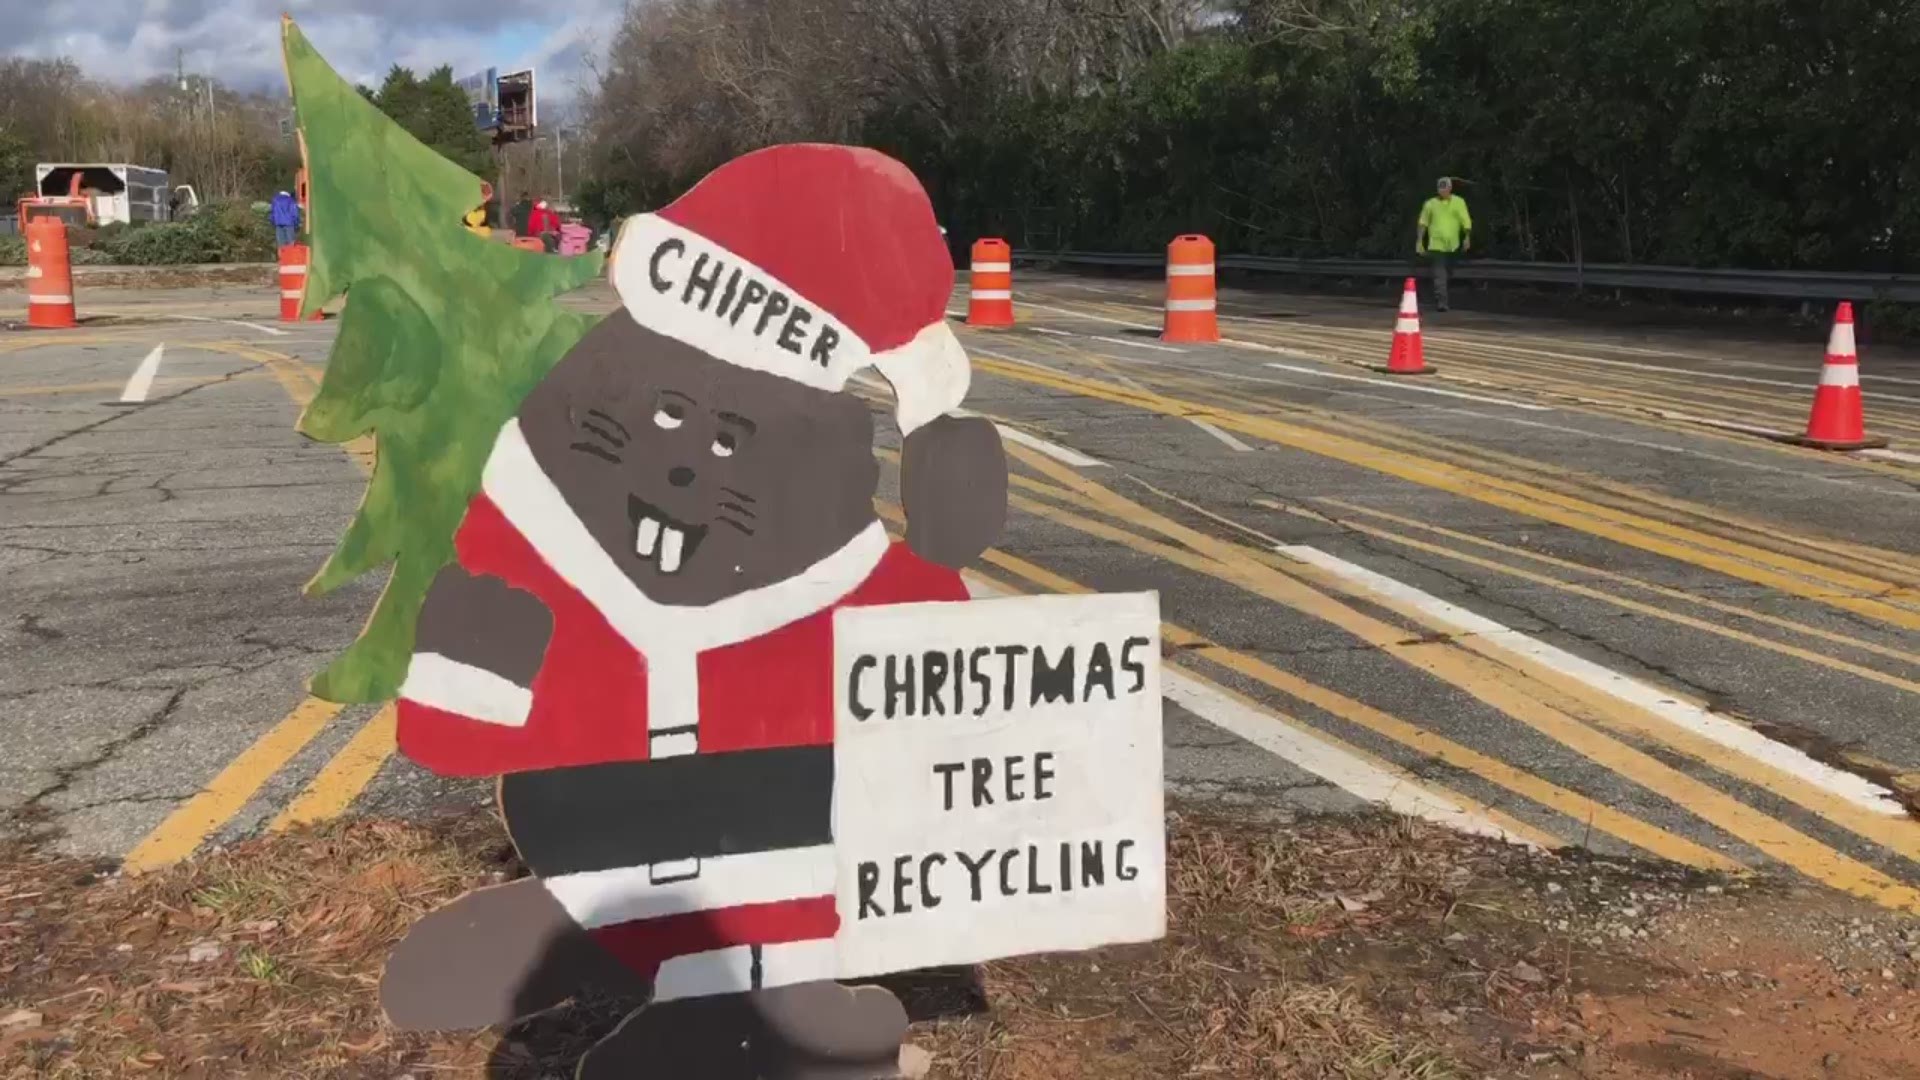 "The ultimate goal is to keep the trees out of the landfill and to recycle them," Keep Macon Beautiful Commission President Pamela Carswell said.